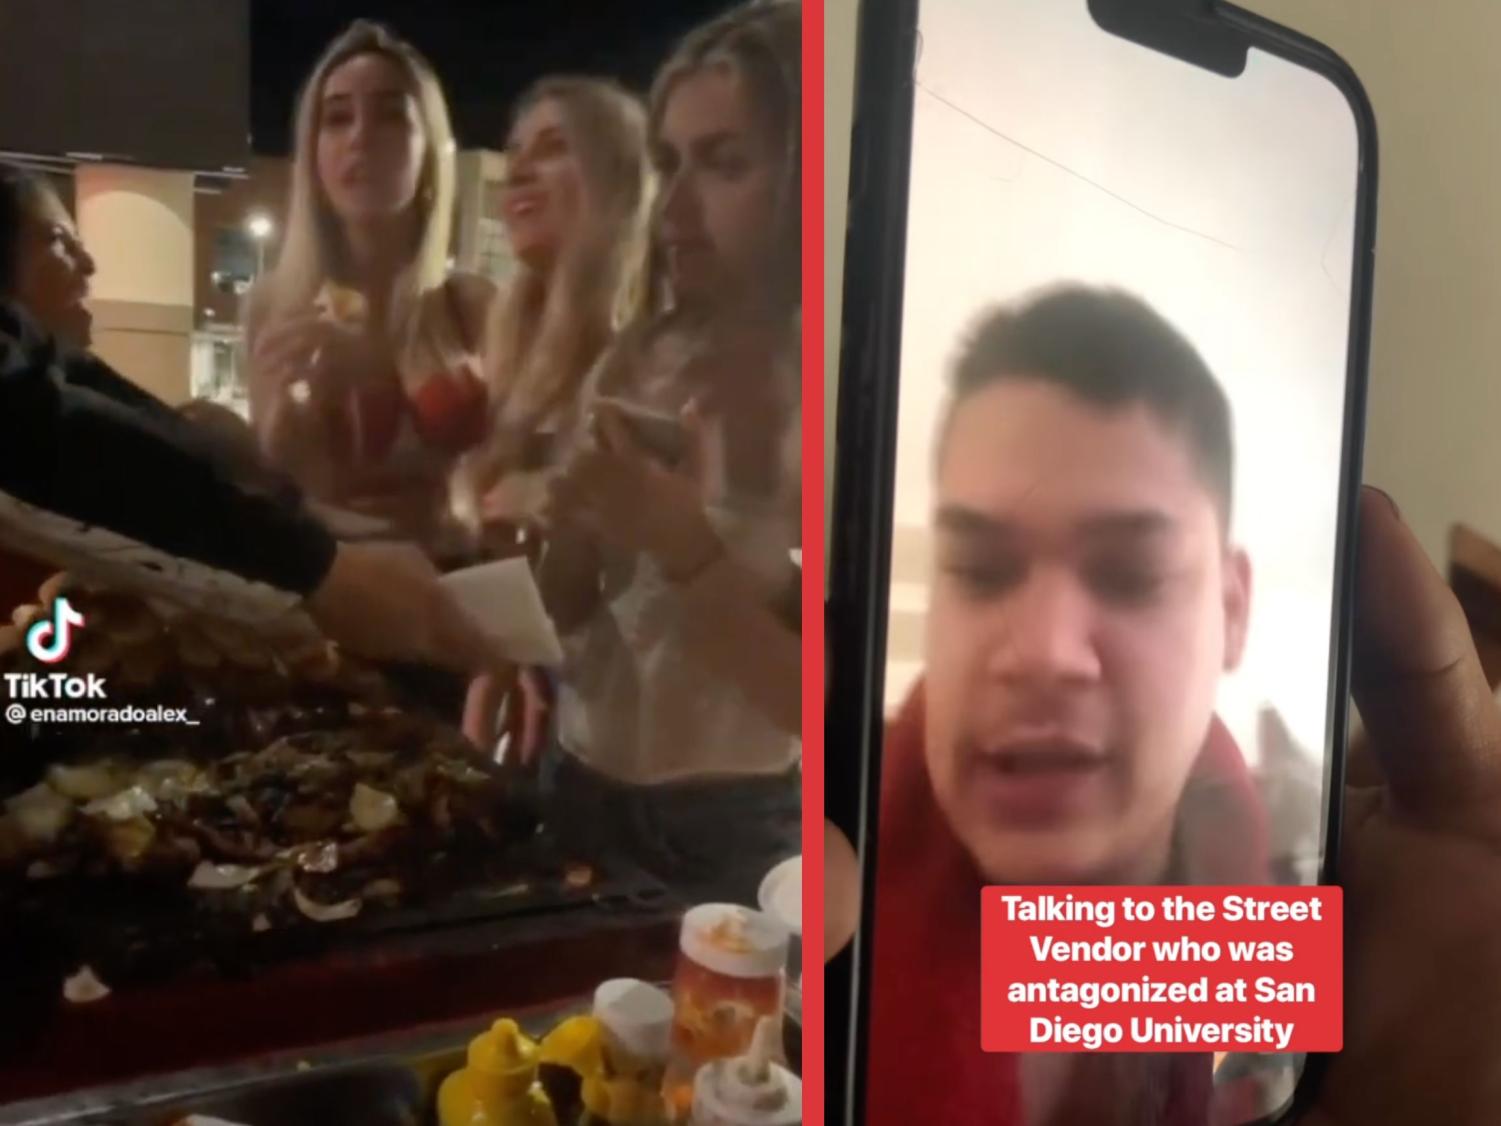 Screenshot of the viral TikTok video with over 200k views and Instagram video of the street vendor, Andres Arguelles Alvarez, describing his experience with the four women that argued with him.